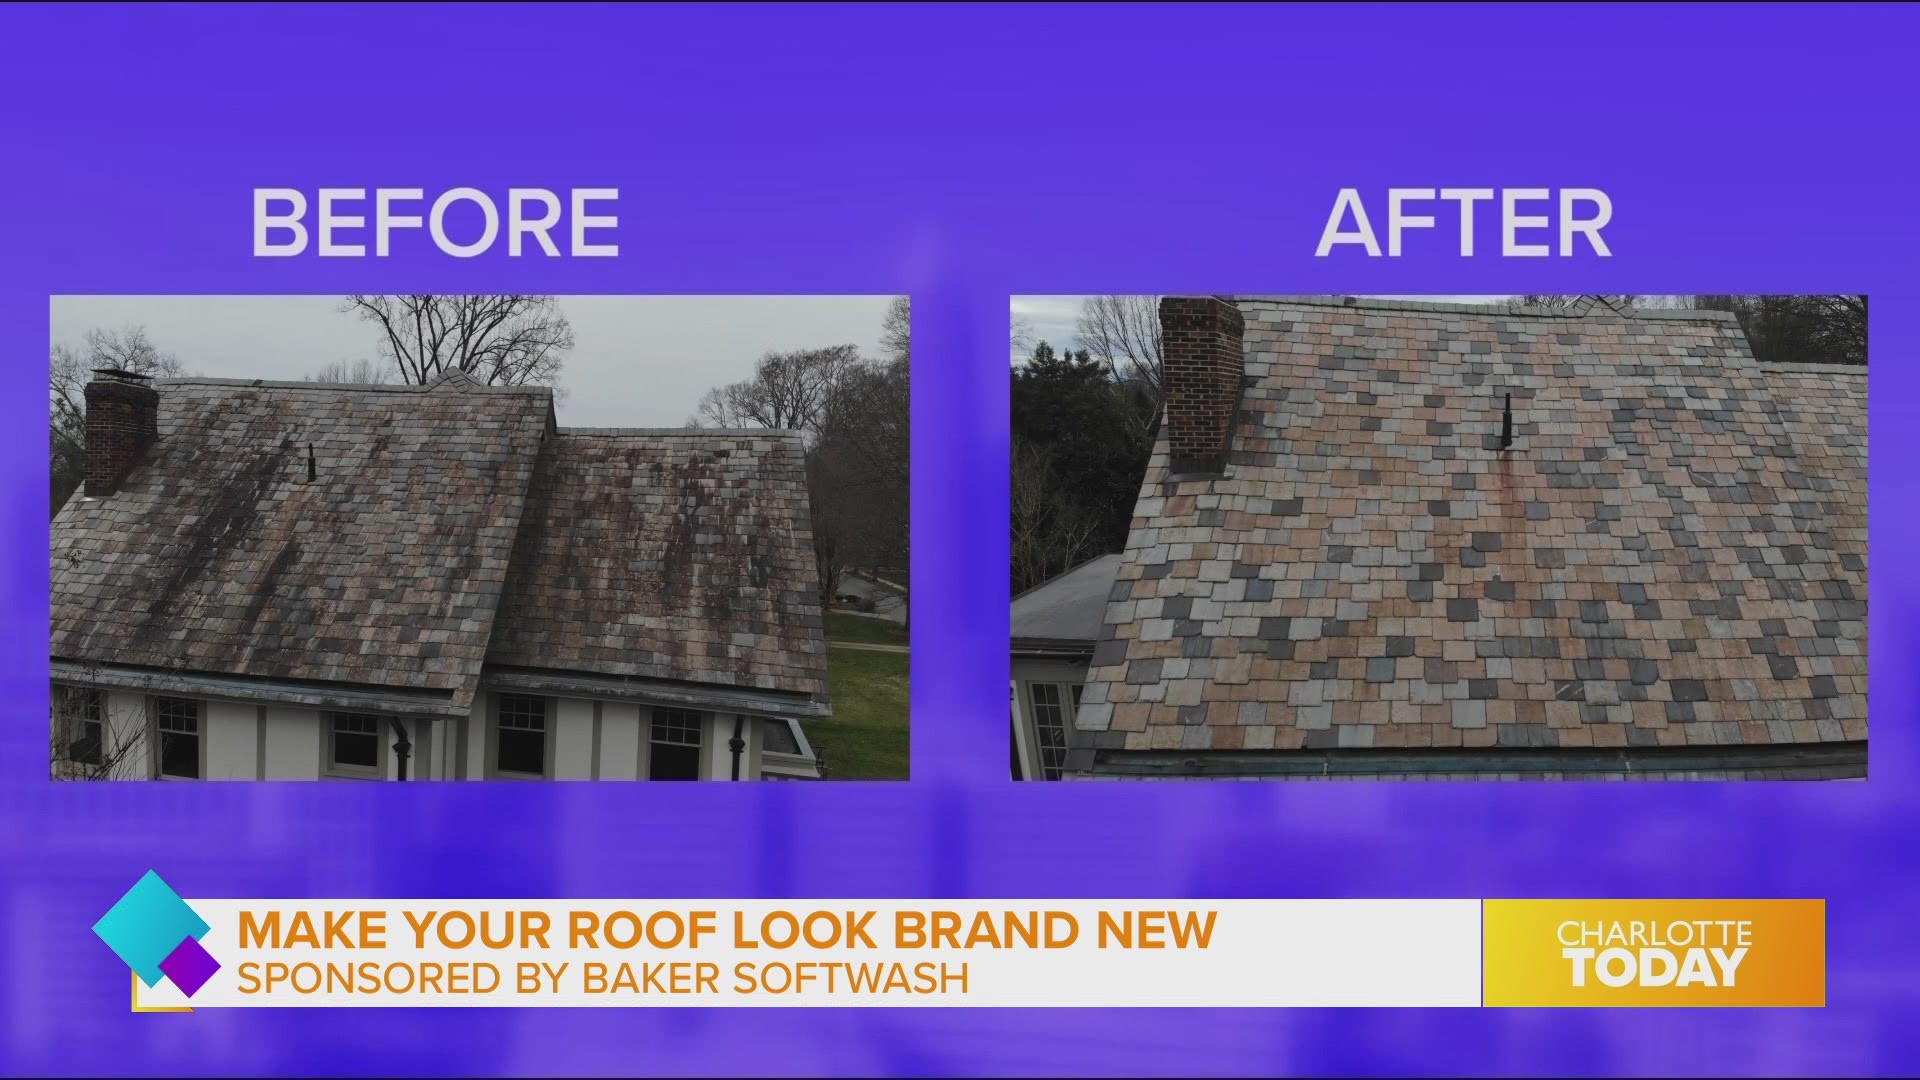 Roof cleaning will make your home look new again